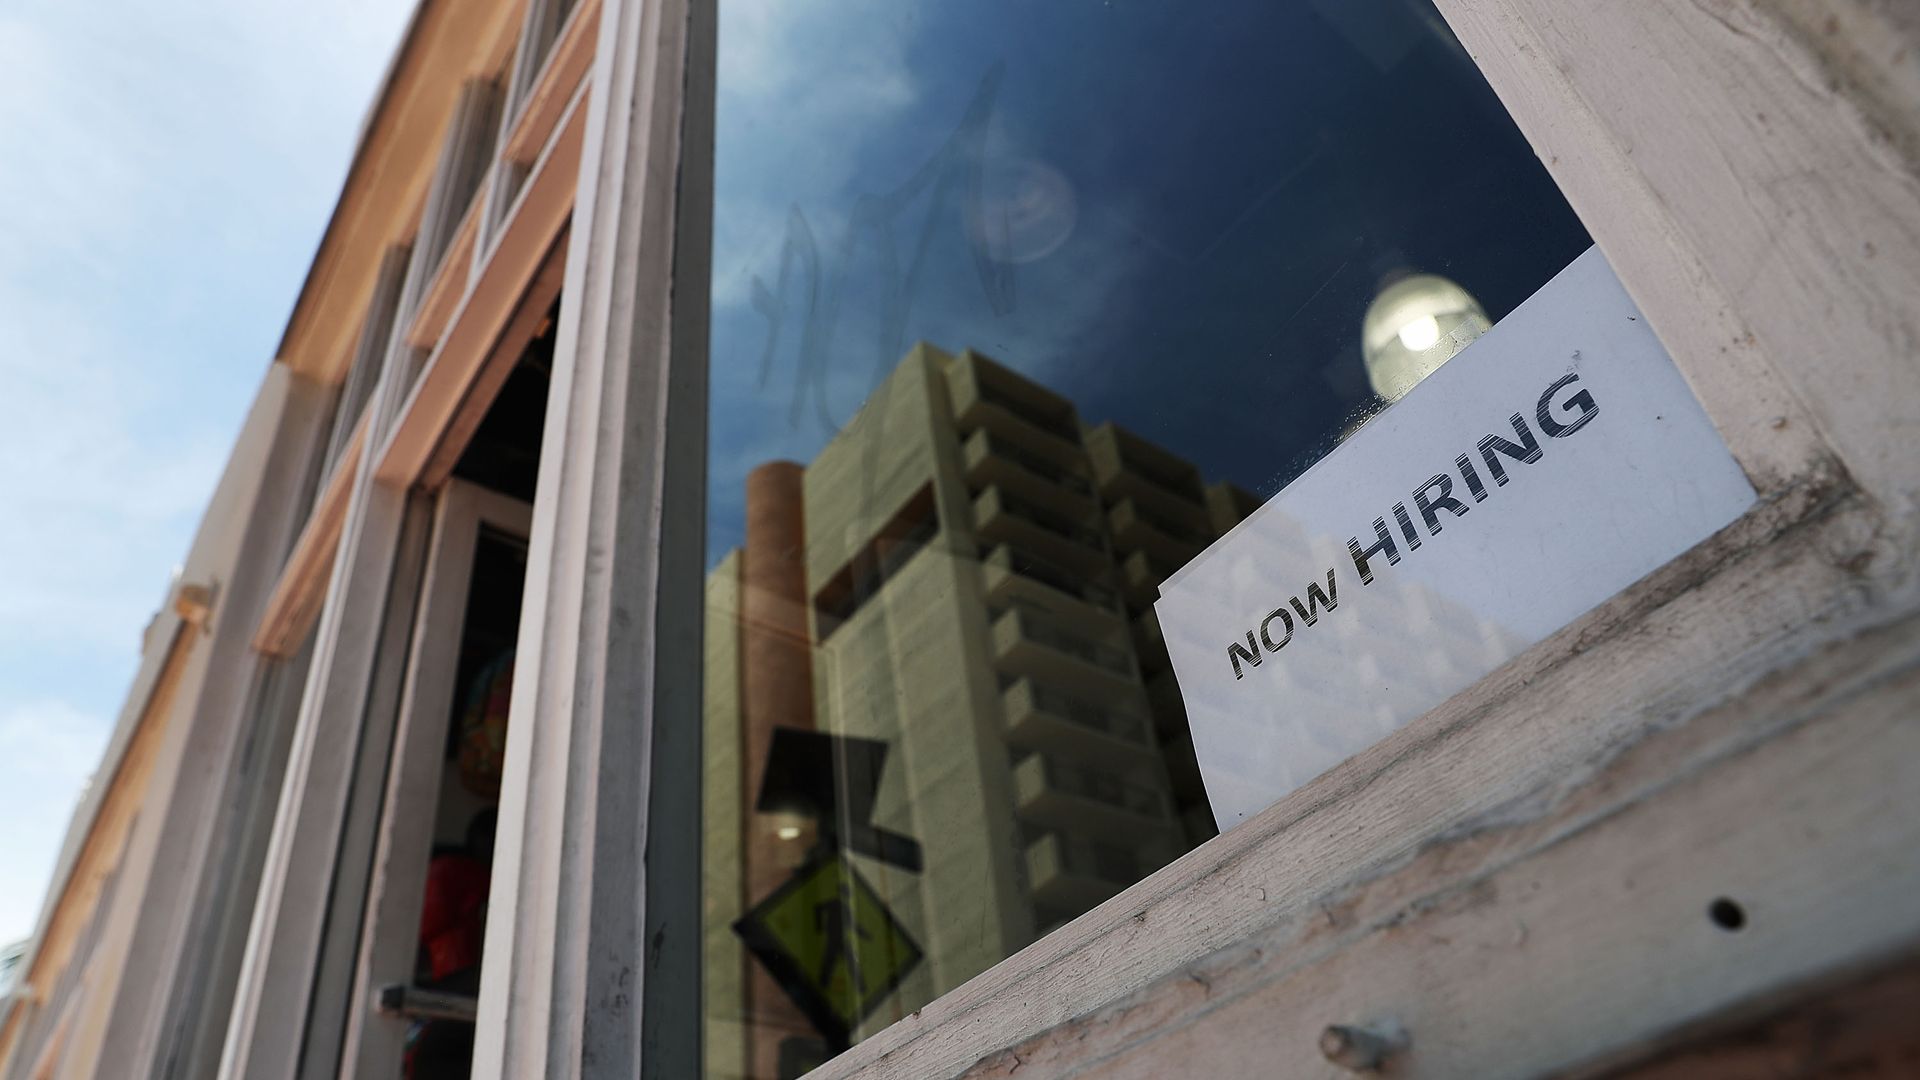 A simple "now hiring" sign in the window of a shop 